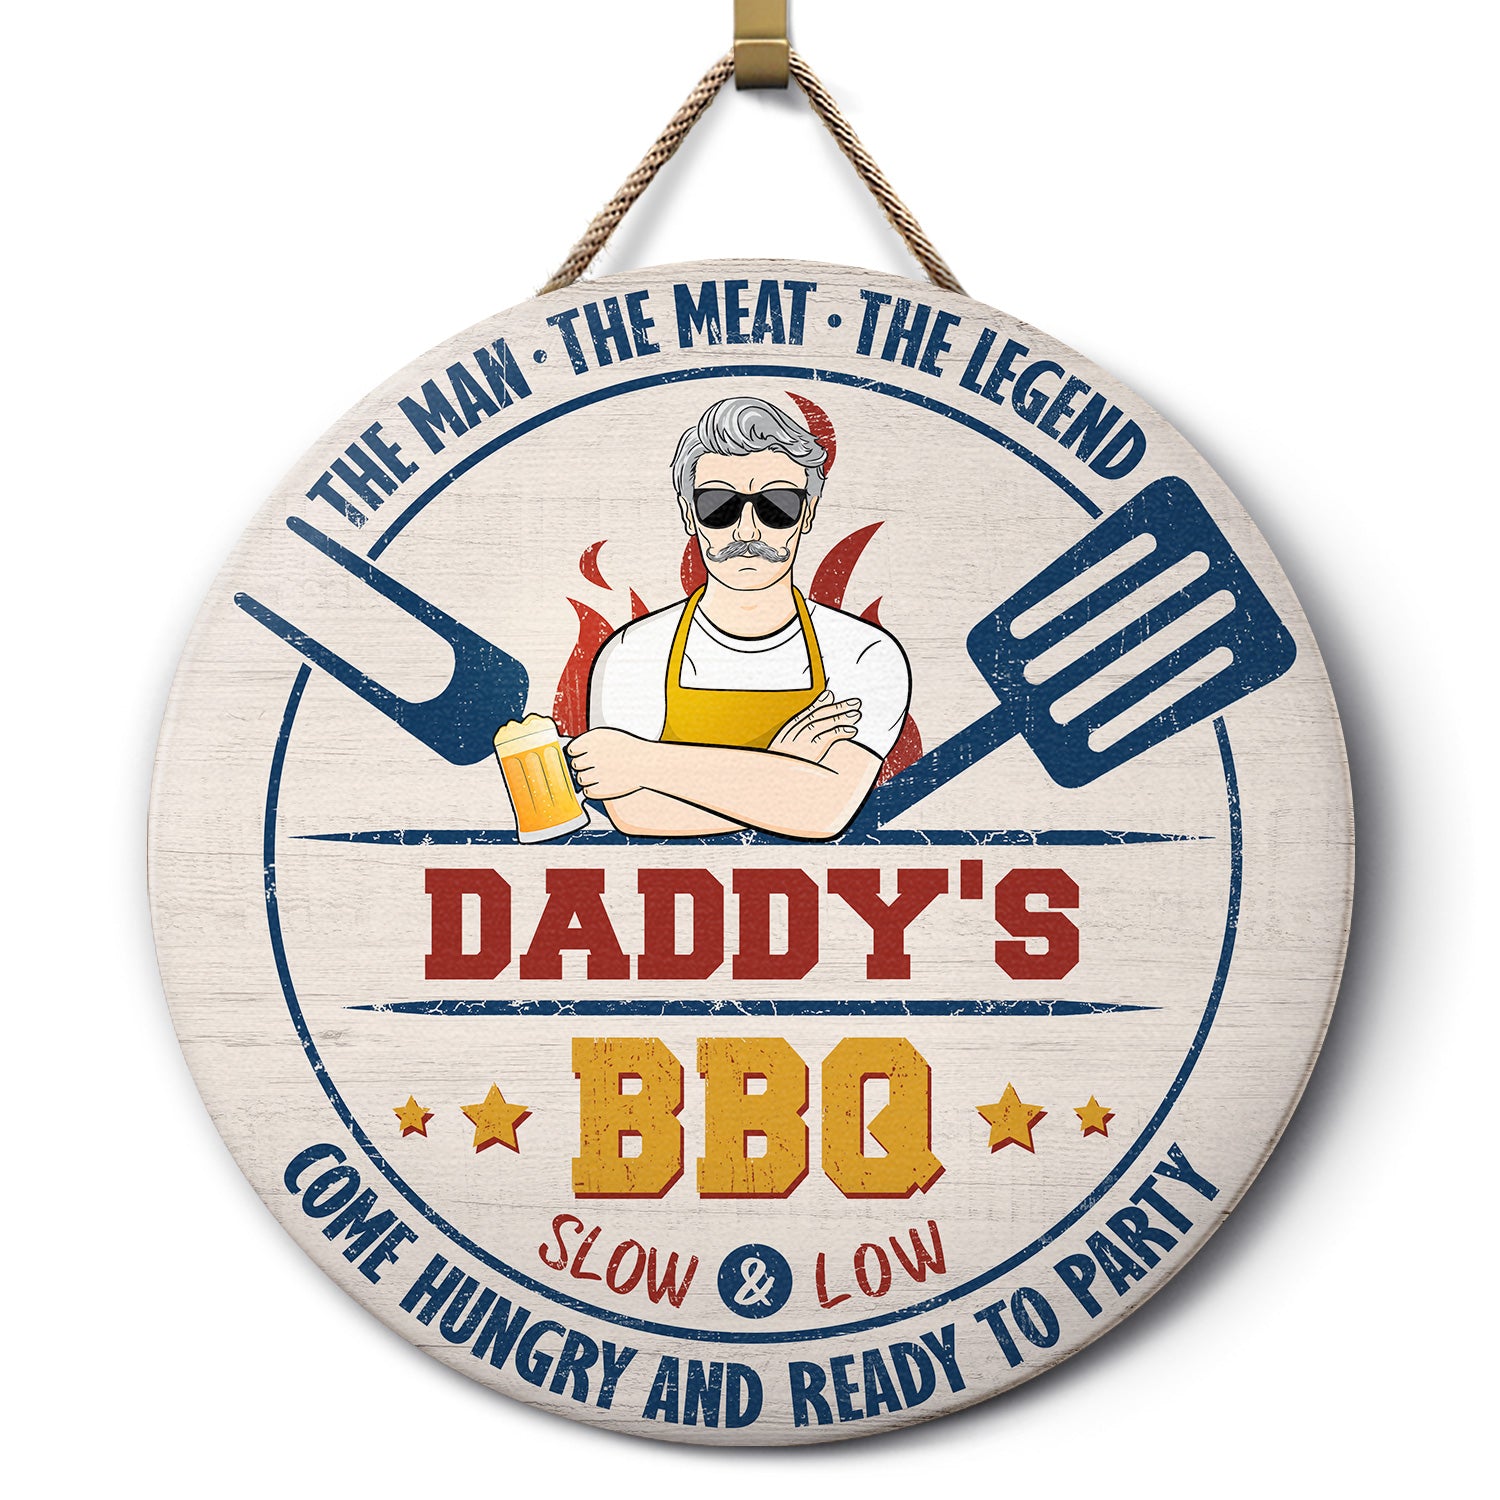 Grilling The Man The Meat The Legend - Gift For Father And Grandpa - Personalized Custom Wood Circle Sign